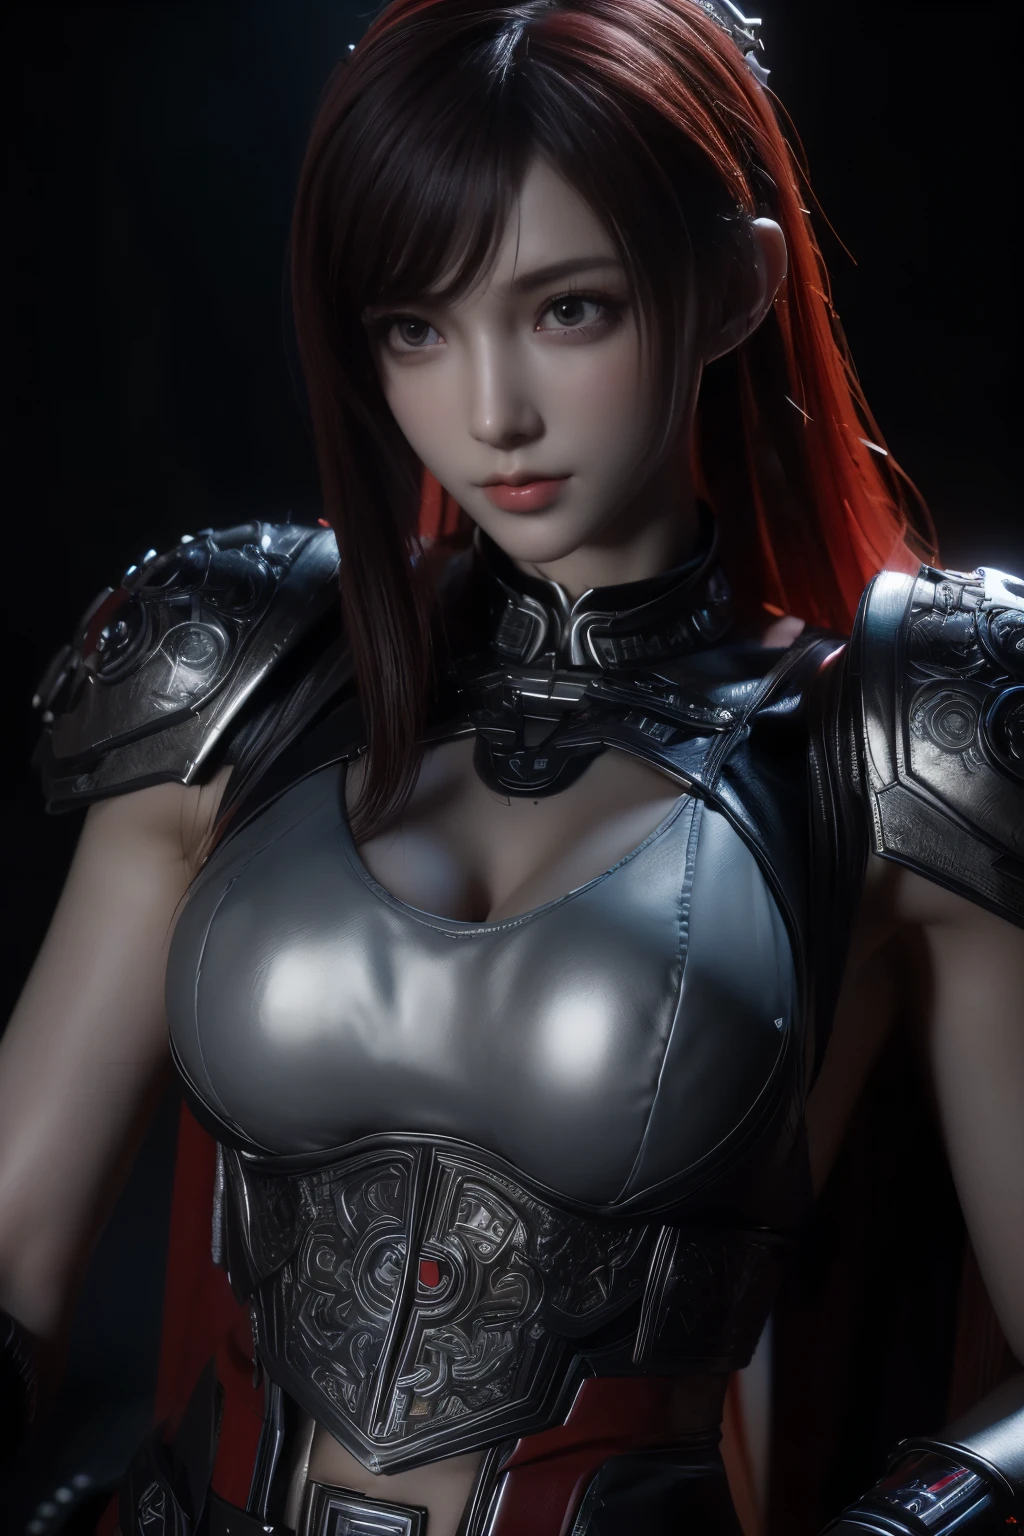 Masterpiece,Game art,The best picture quality,Highest resolution,8K,(A bust photograph),(Portrait),(Head close-up),(Rule of thirds),Unreal Engine 5 rendering works,(Digital Photography),
20 year old girl,Short hair details,With long bangs,The red eye makeup is very meticulous,(Short White Hair,Fiery red eyes),(Large, full breasts),
(A combat suit that combines fantasy and science fiction,Chinese ancient style clothing combined with sci-fi elements,Shoulder pads,Hollow design,The Devil's Crown,Metallic texture,Cloak),Valkyrie in the world of cyberpunk,Grey background,
Movie lights，Ray tracing，Game CG，((3D Unreal Engine))，oc render reflection texture